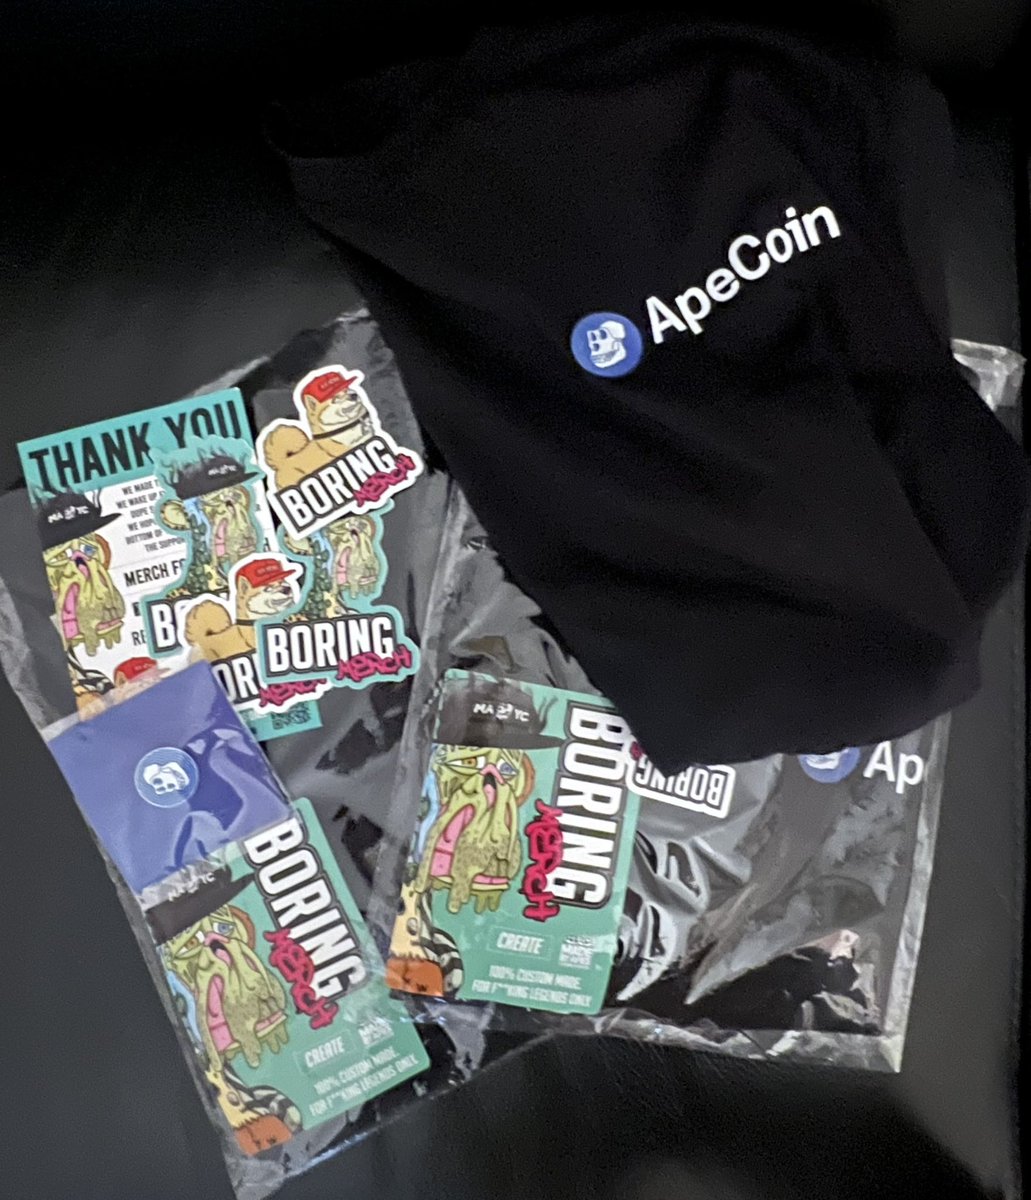 Just landed to @ParisBlockWeek to my new @apecoin merch! Will wear during the NFT and Gaming panel as well as the Metaverse panel with @dim8765. Thank you @boringmerch for hooking this up! #Paris2024